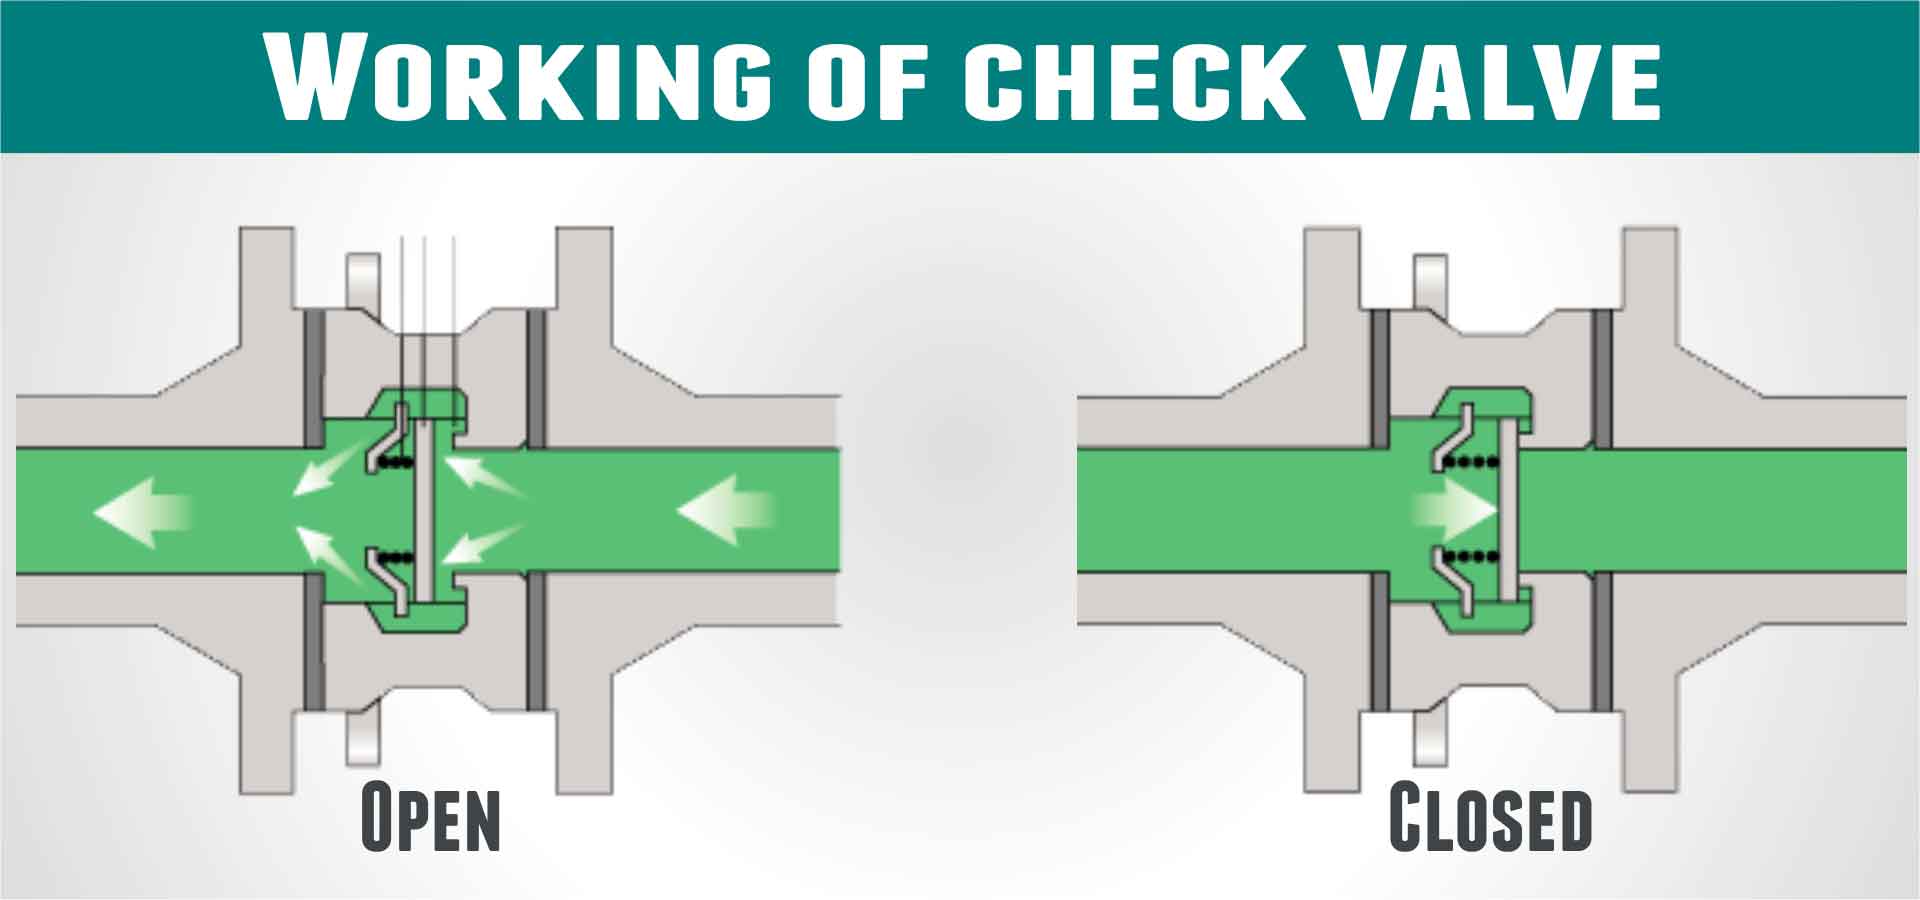 How Does a Check Valve Work?